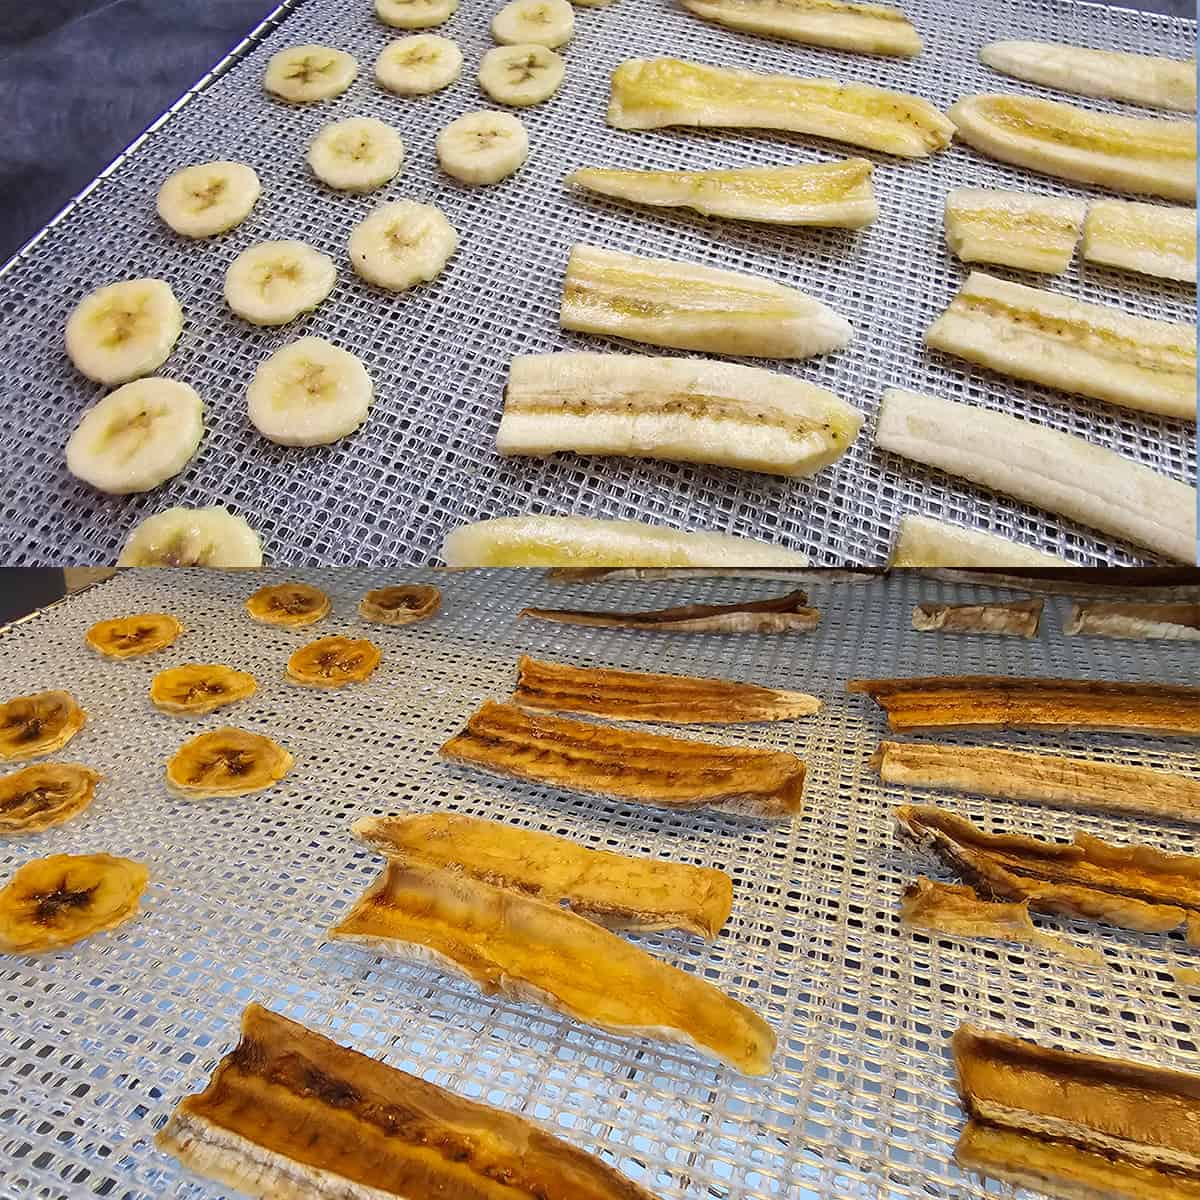 Two pictures of banana slices on a cooling rack.